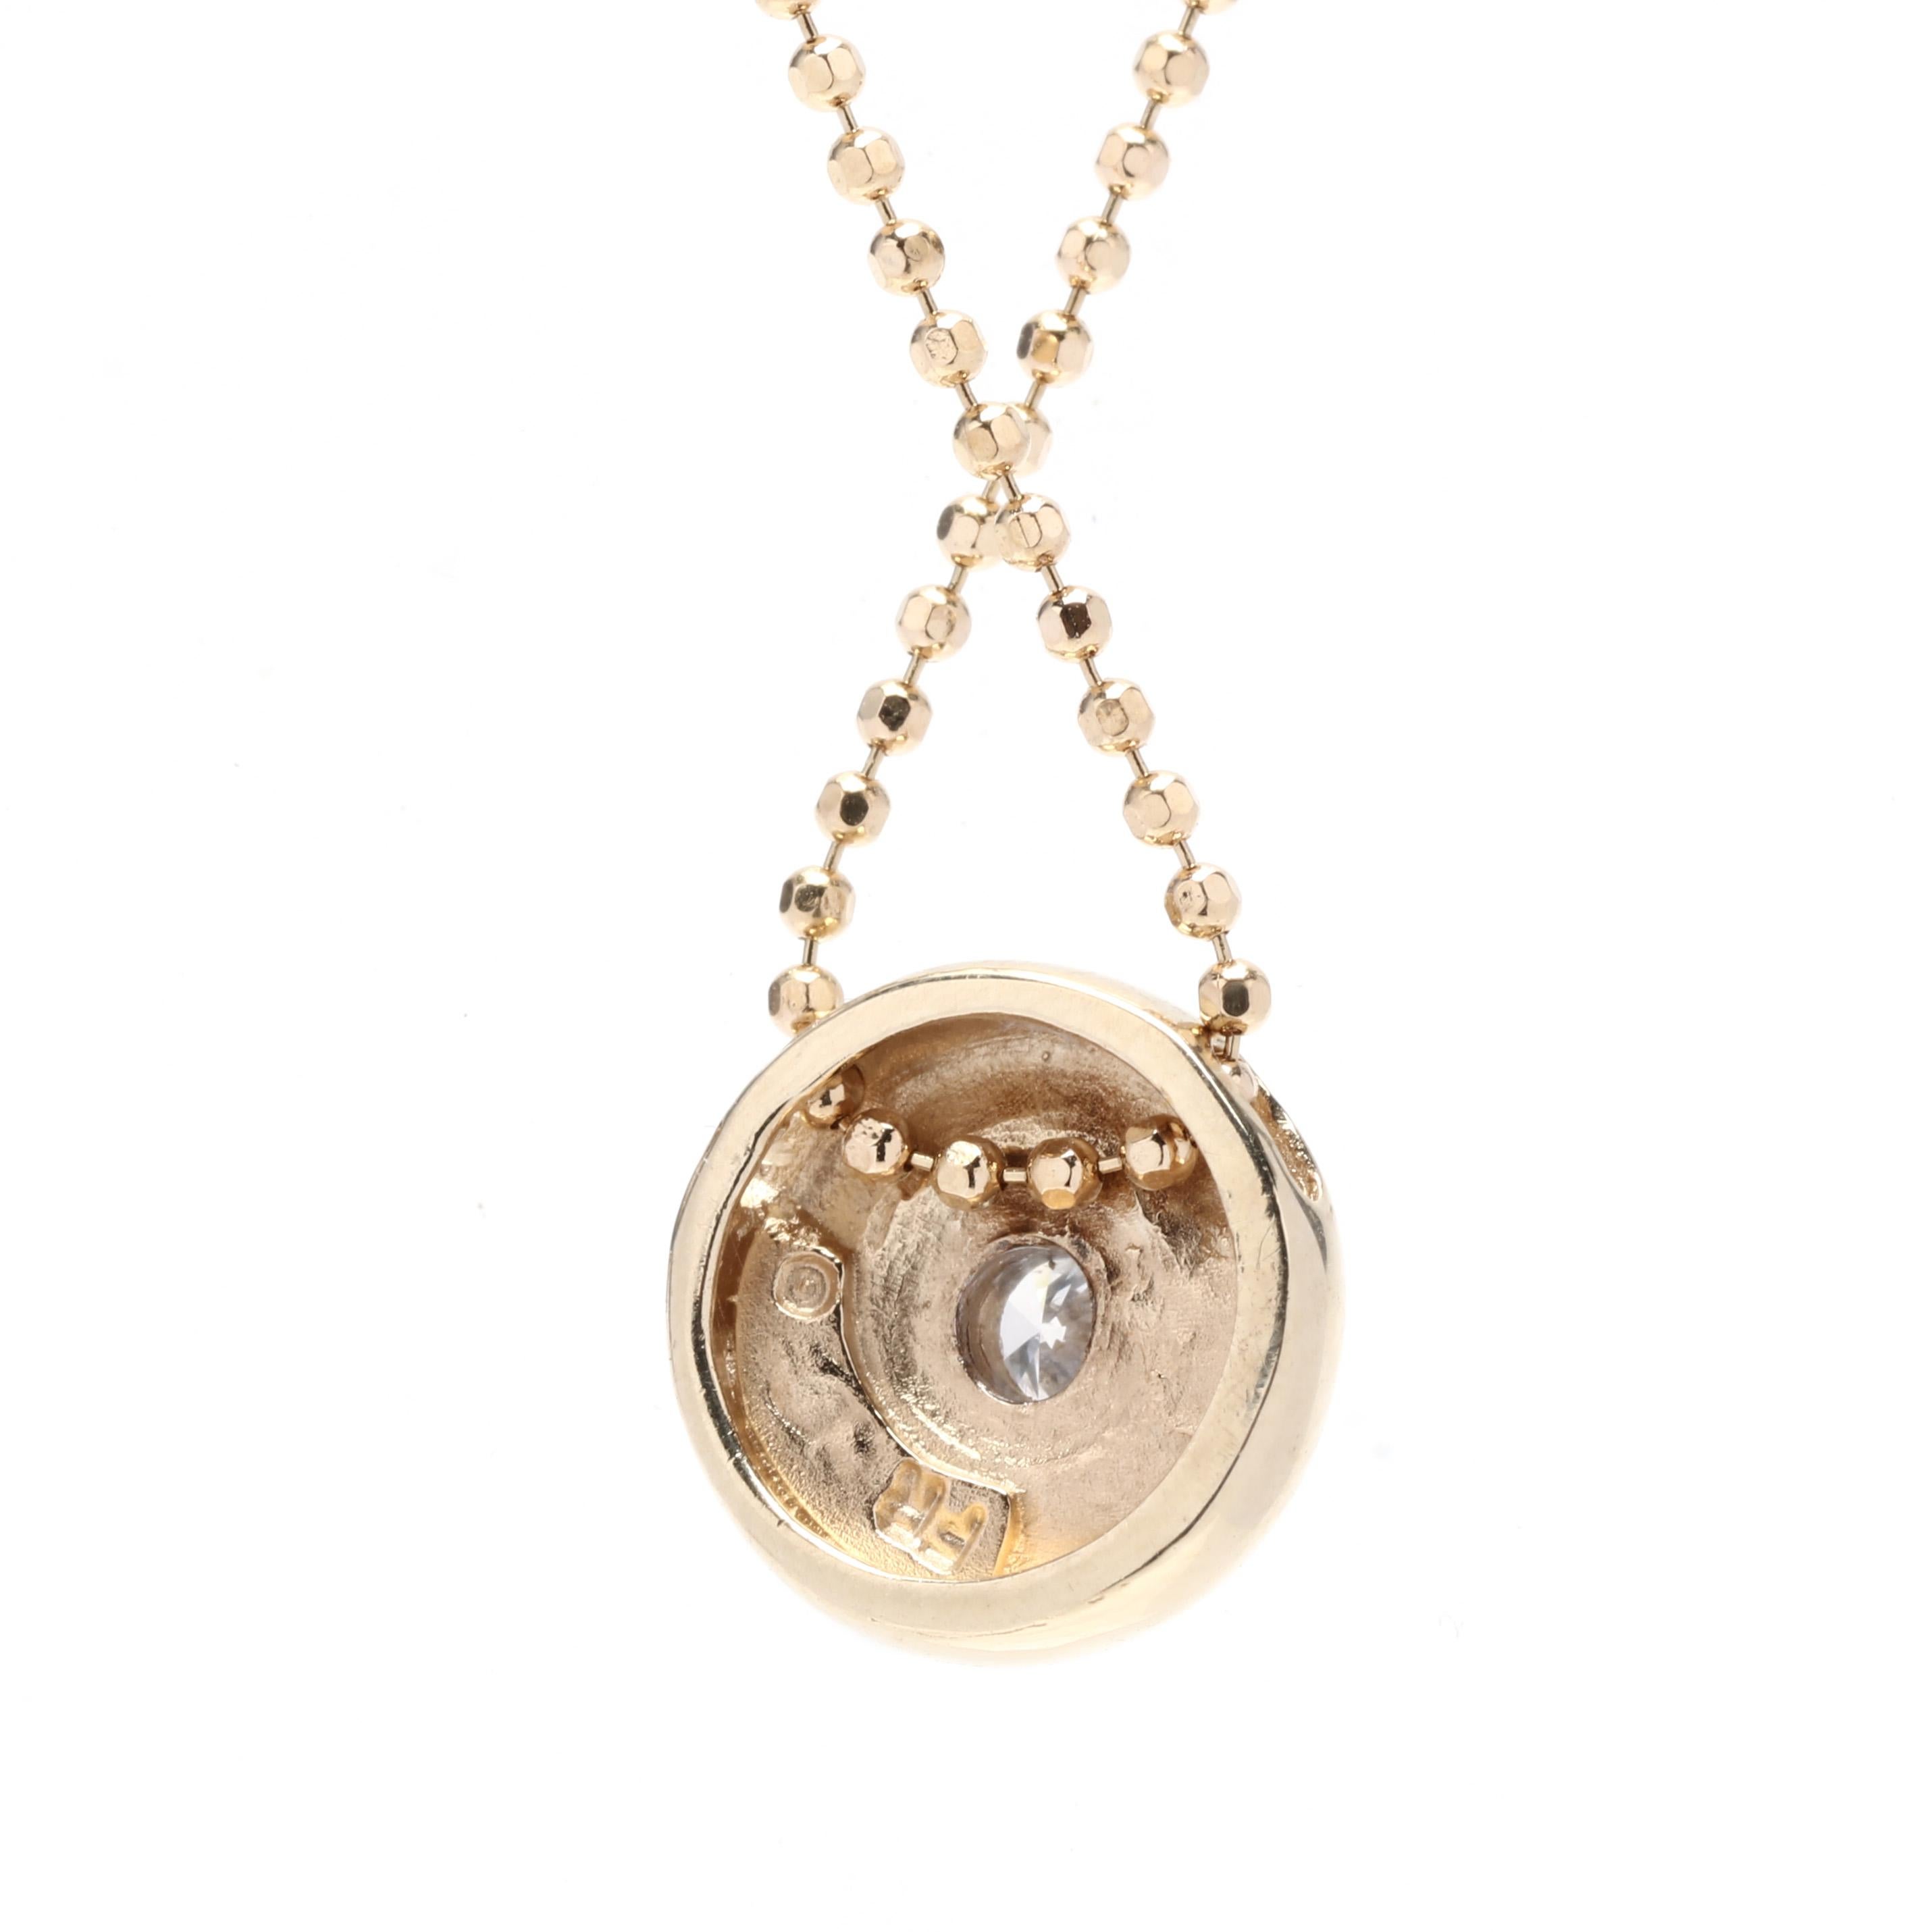 A vintage 18 and 14 karat yellow gold diamond solitaire pendant necklace. This simple pendant features a round design with a round brilliant cut diamond center stone weighing approximately .12 carat suspended from a thin beaded chain.

Stones:
-